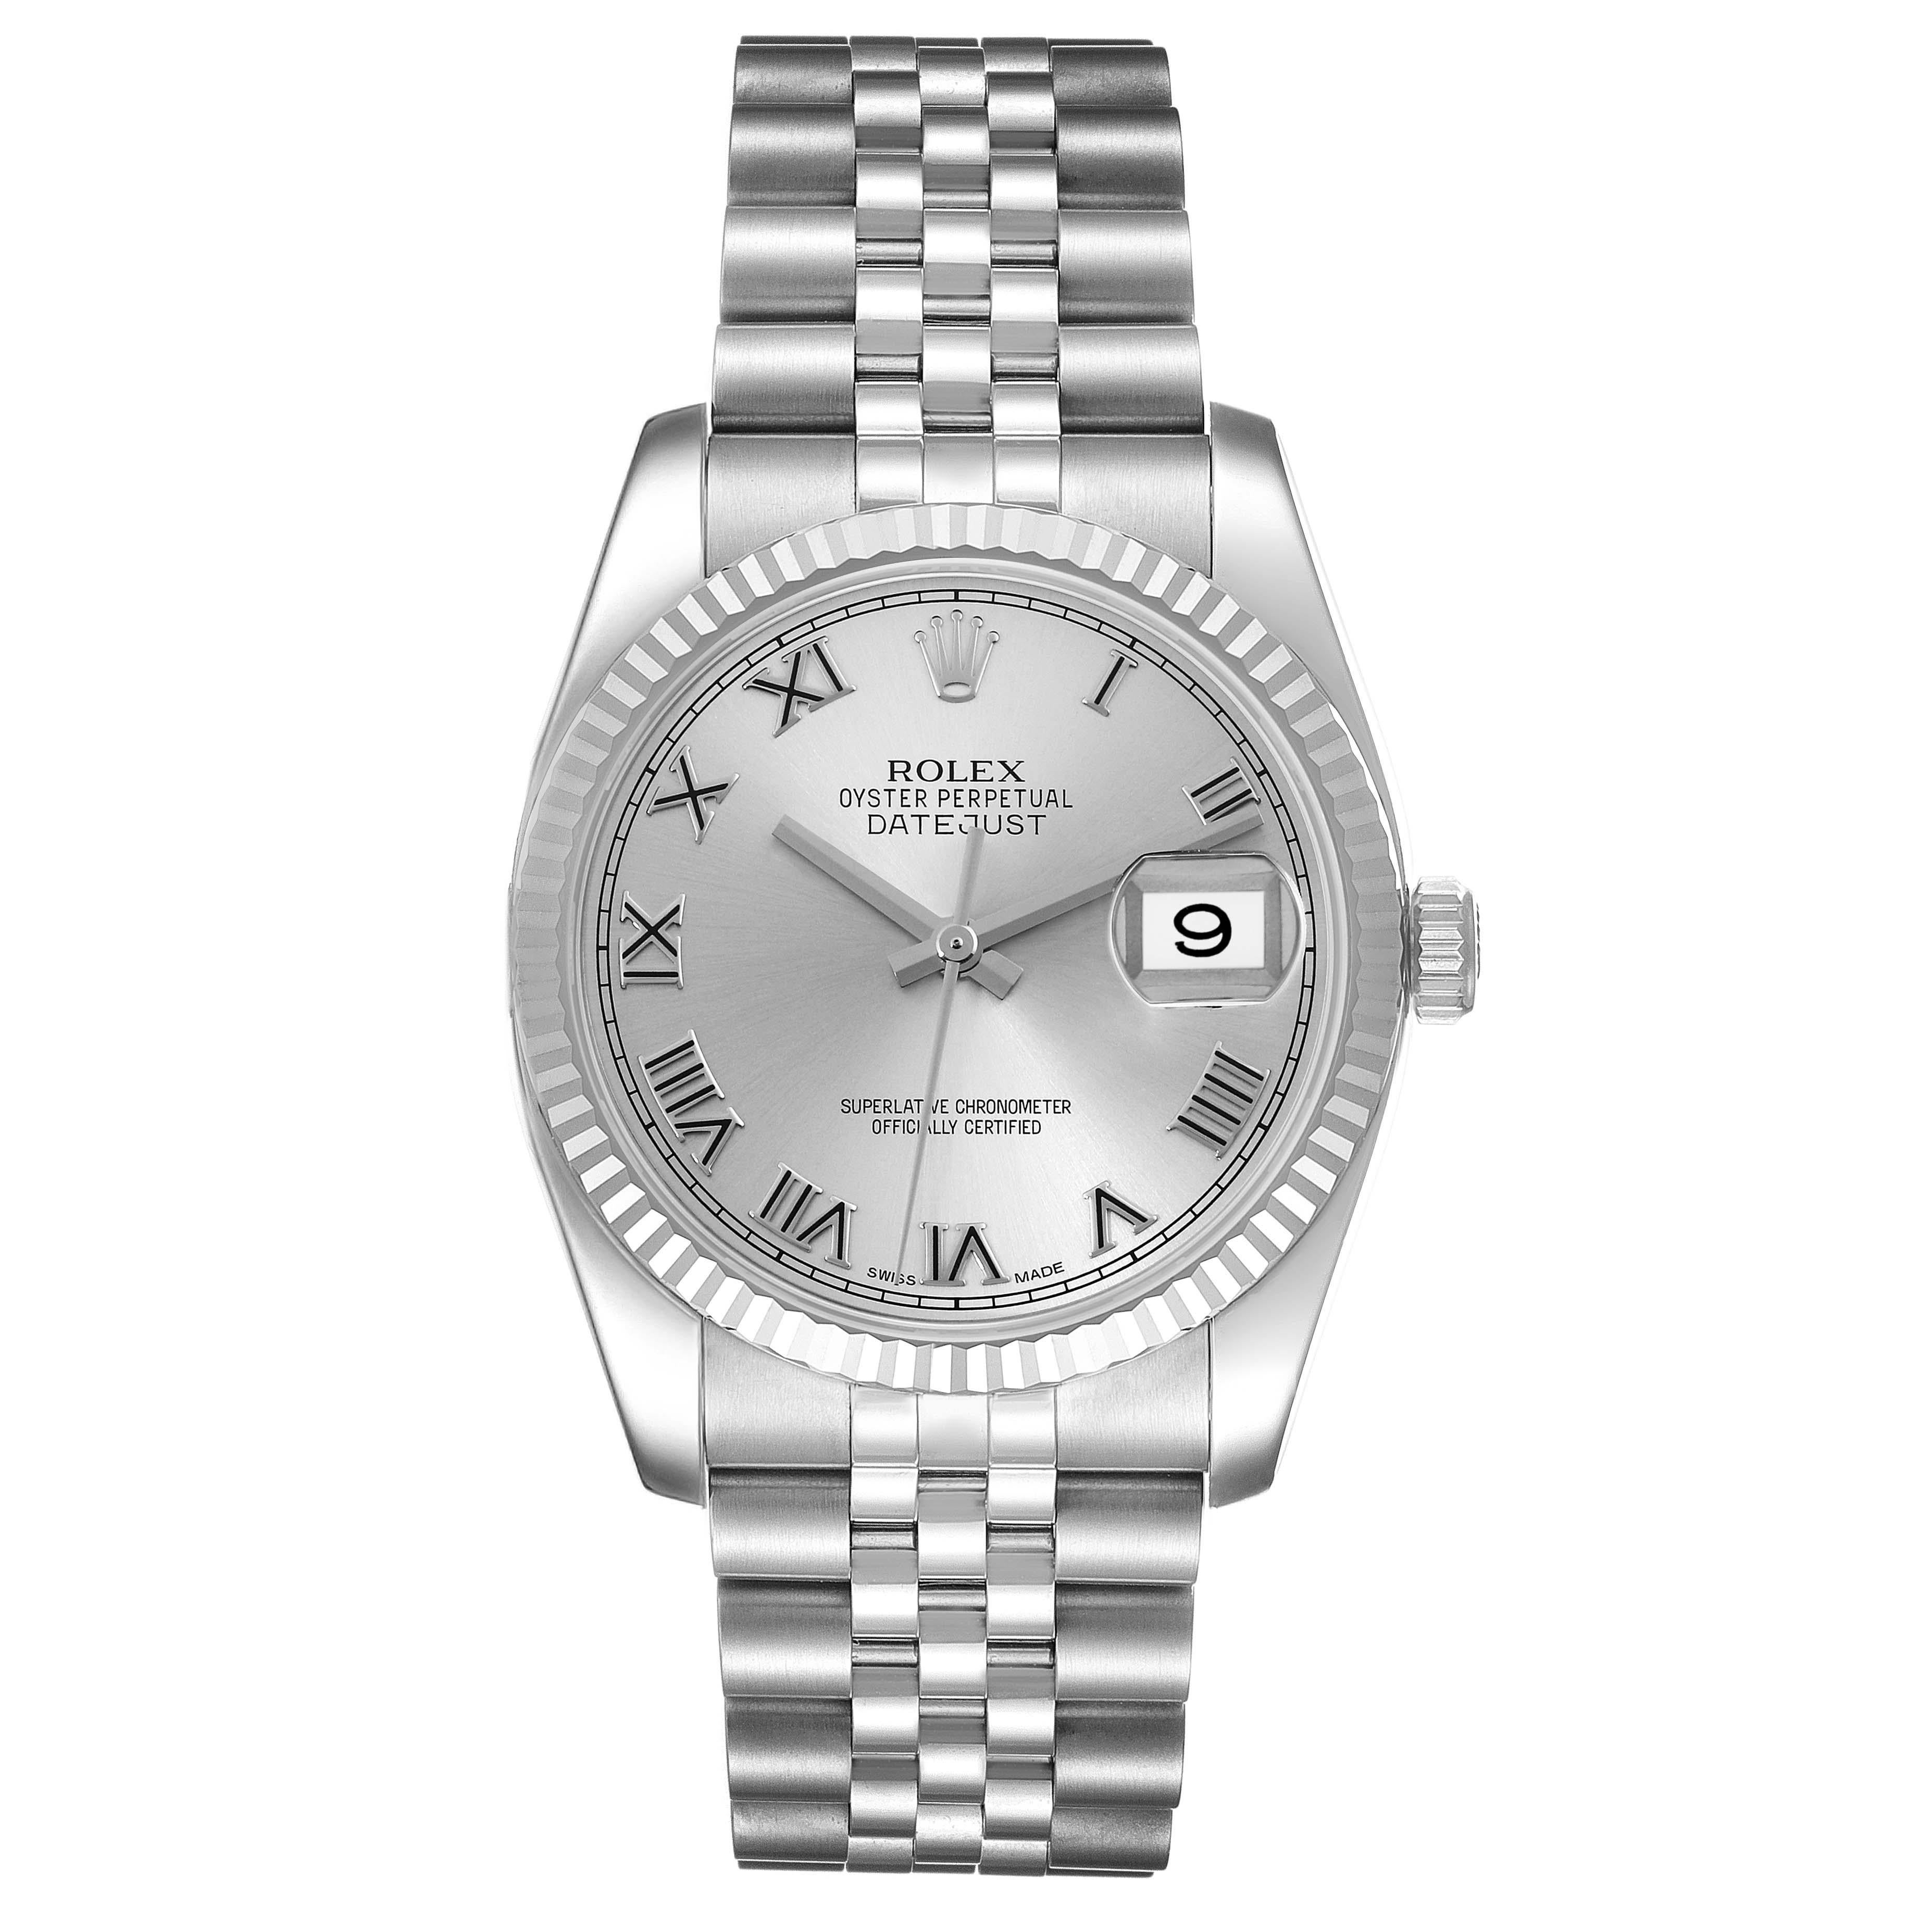 Rolex Datejust Steel White Gold Silver Roman Dial Mens Watch 116234. Officially certified chronometer self-winding movement. Stainless steel case 36.0 mm in diameter.  Rolex logo on a crown. 18K white gold fluted bezel. Scratch resistant sapphire